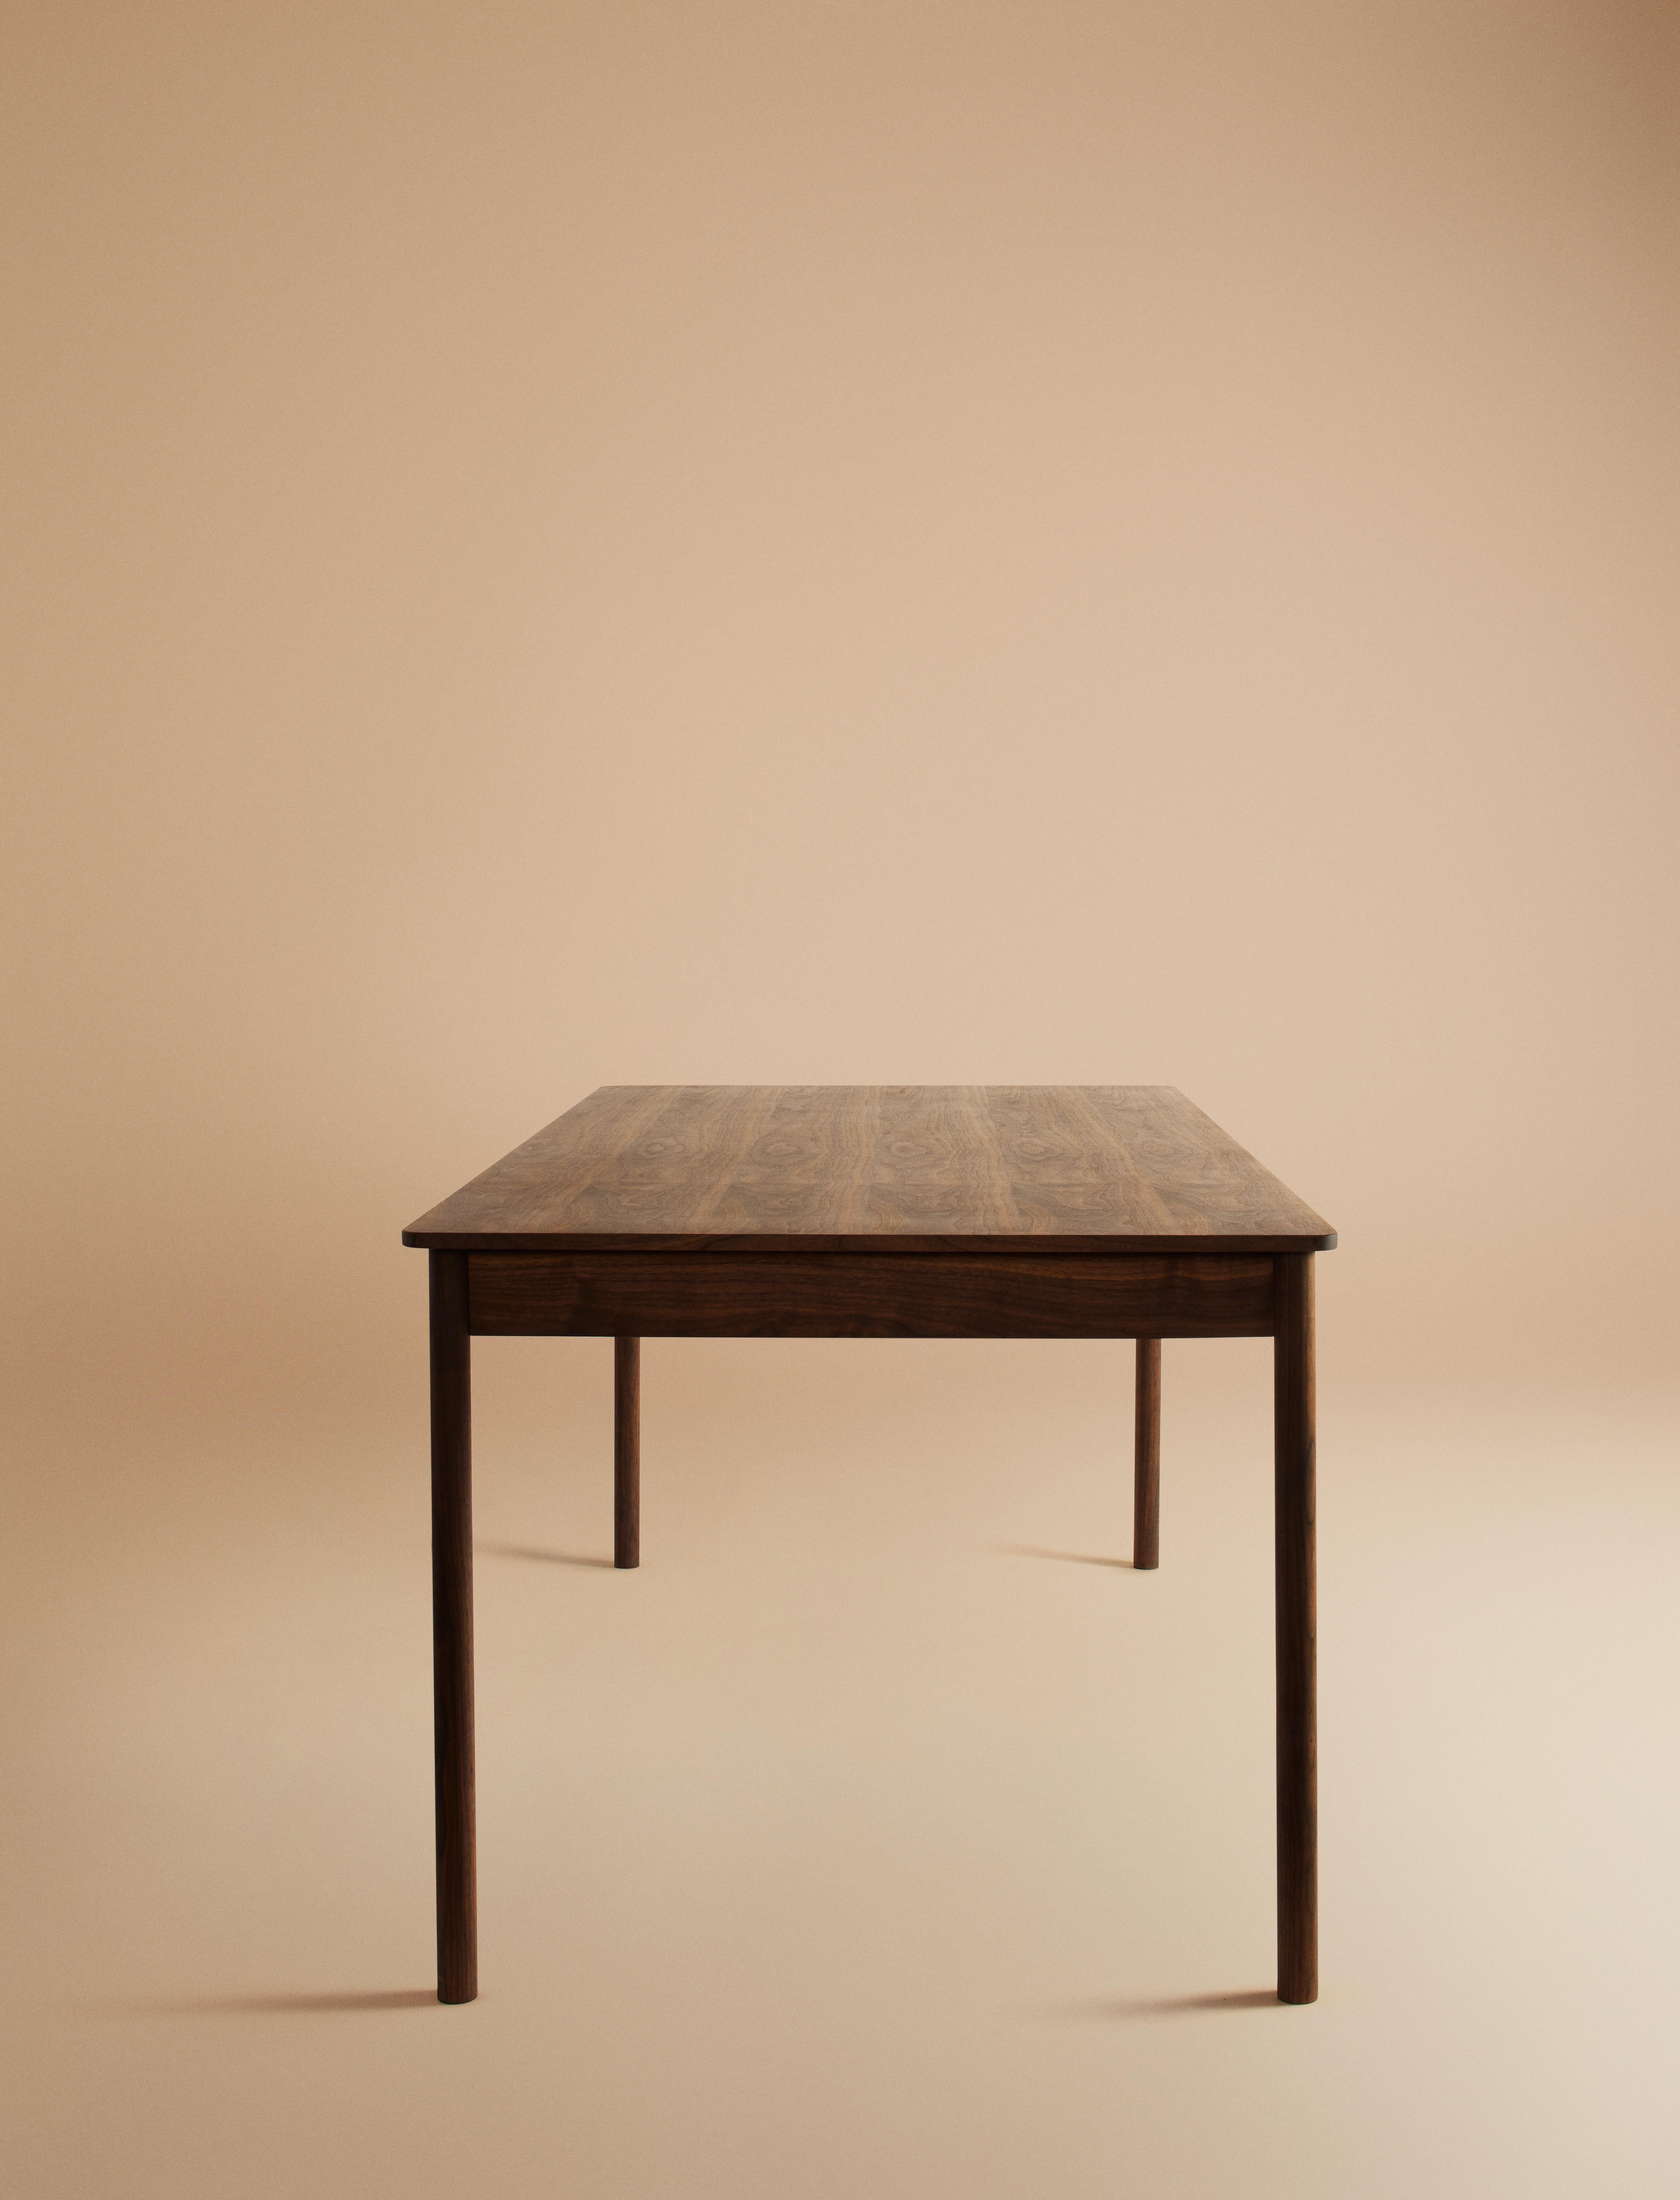 Contemporary Sutton Table Handcrafted in Walnut or Oak Designed by Kevin Frankental for Lemon